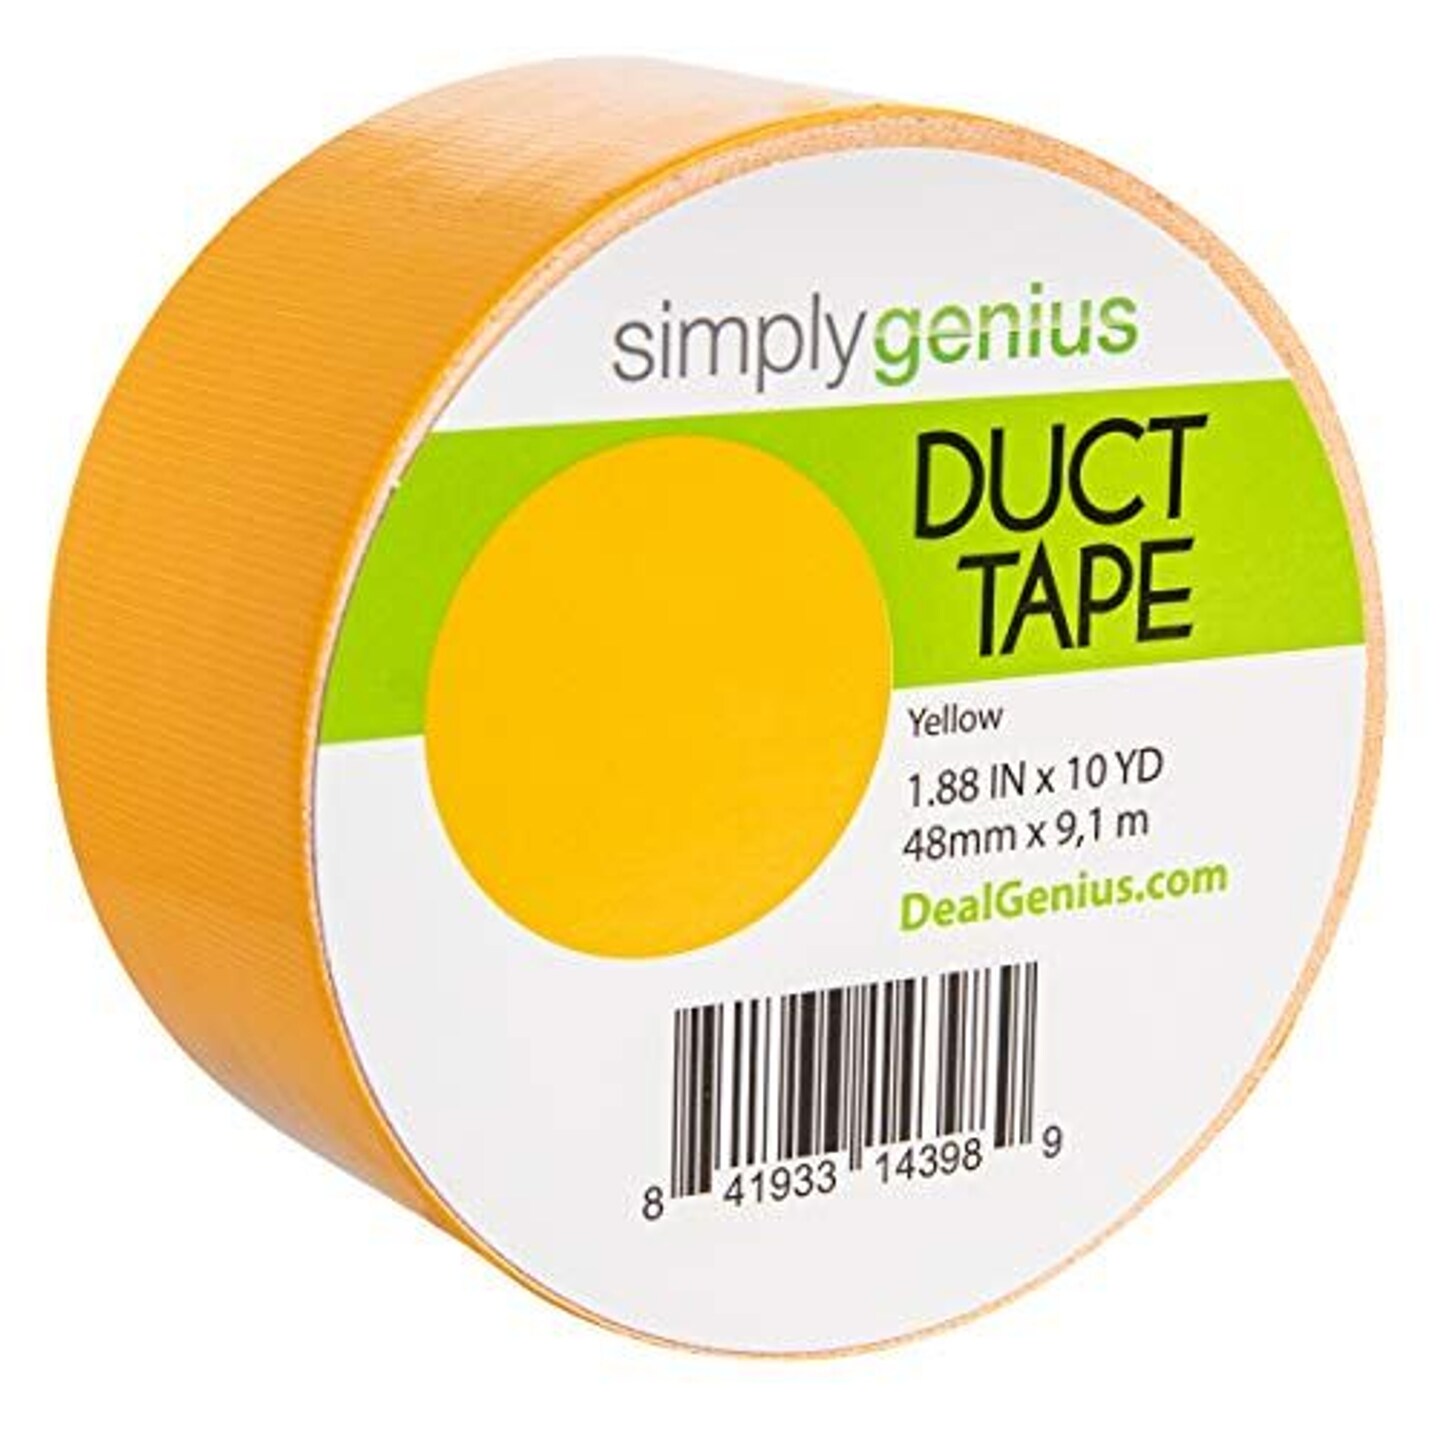 Simply Genius Art &#x26; Craft Duct Tape Heavy Duty - Craft Supplies for Kids &#x26; Adults - Colored Duct Tape - 1.8 in x 10 yards - Colorful Tape for DIY, Craft &#x26; Home Improvement (Yellow, Single roll)